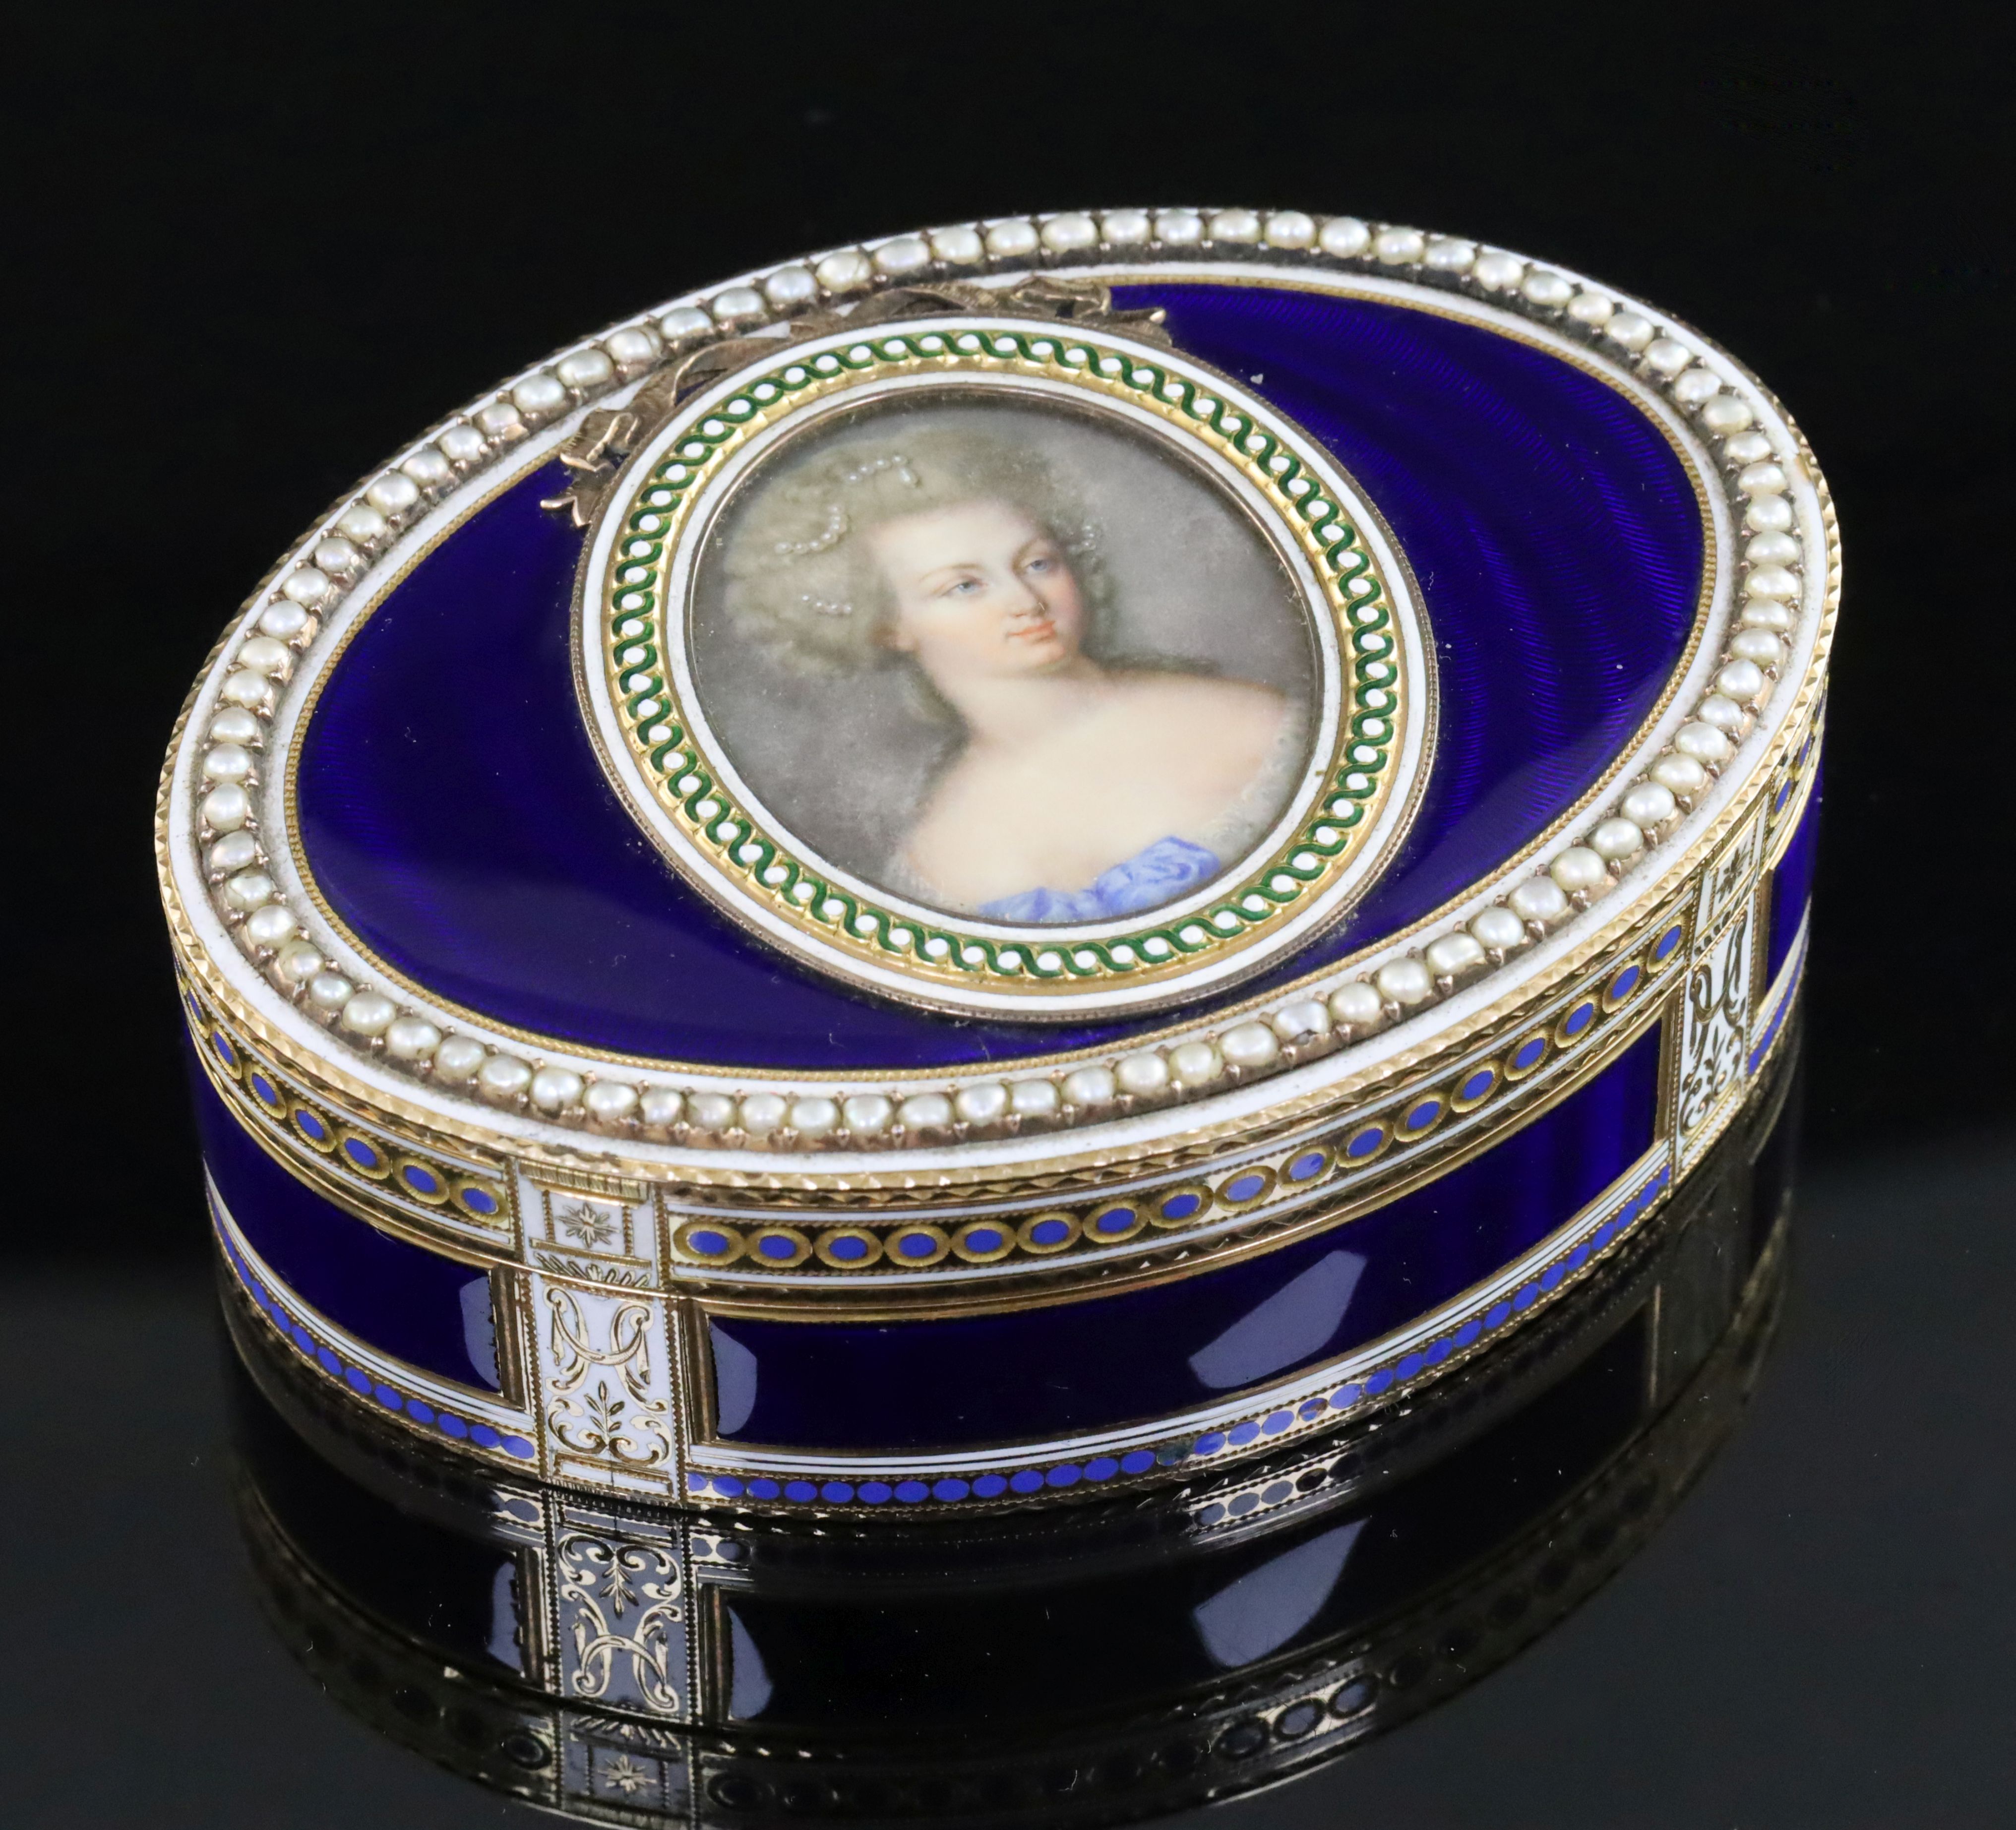 A good late 18th/early 19th century Swiss gold, enamel, split pearl and miniature portrait inset